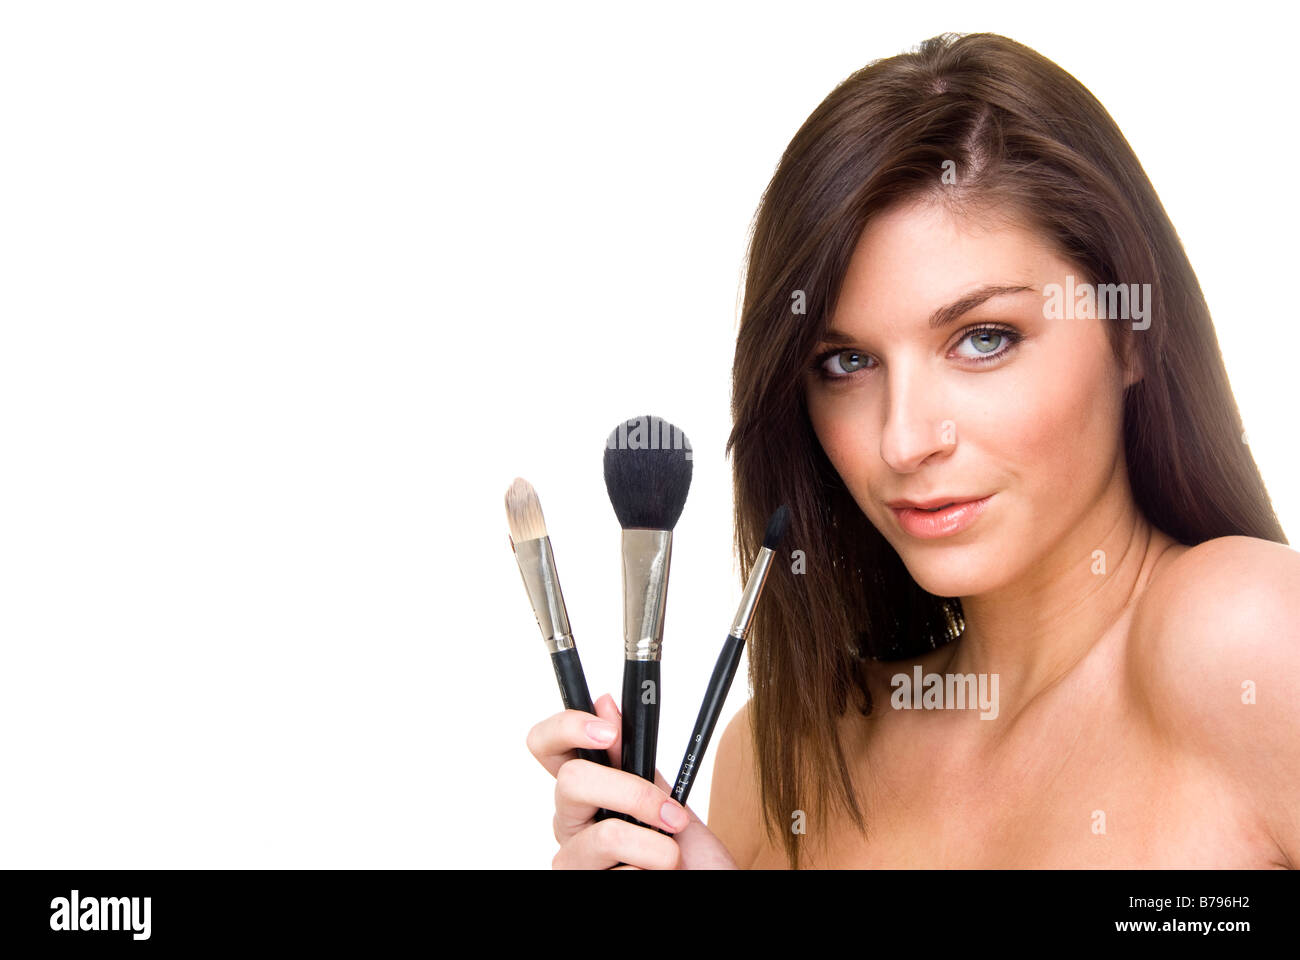 woman holding a set of make up brushes Stock Photo